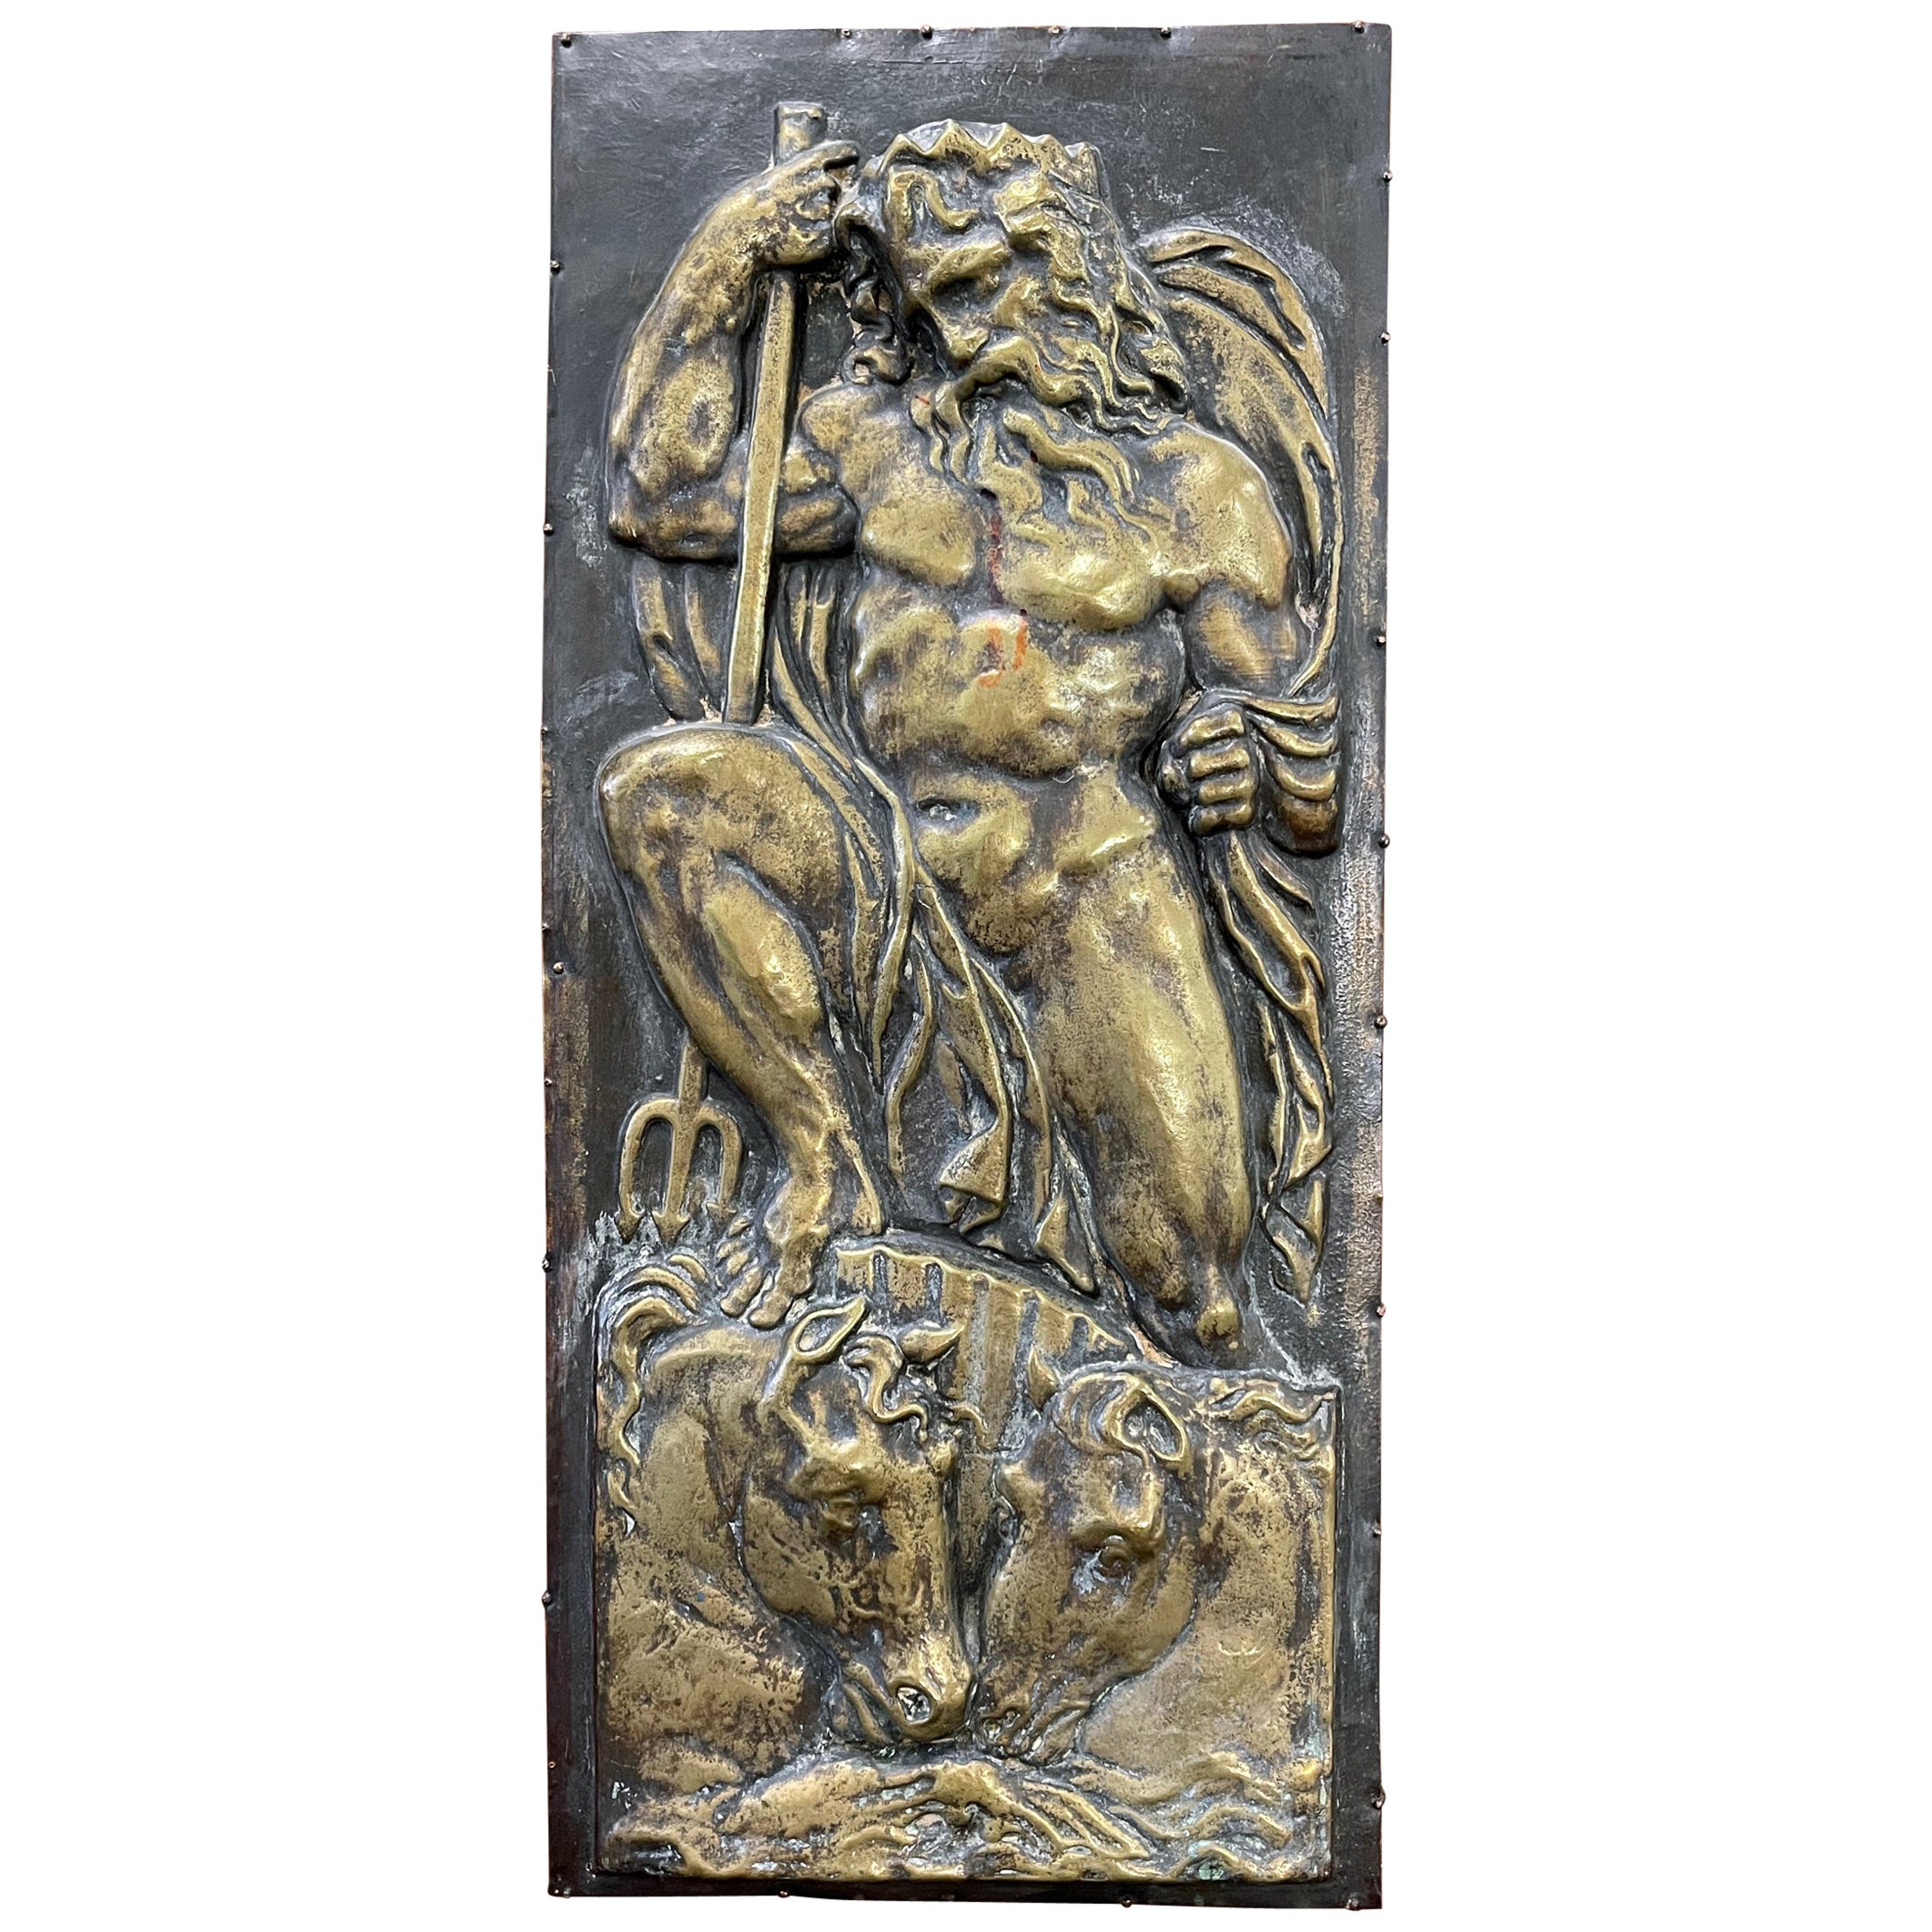 "Poseidon and Vulcan, " Marvelous Brass Repoussé Relief Sculptures, Nude Males